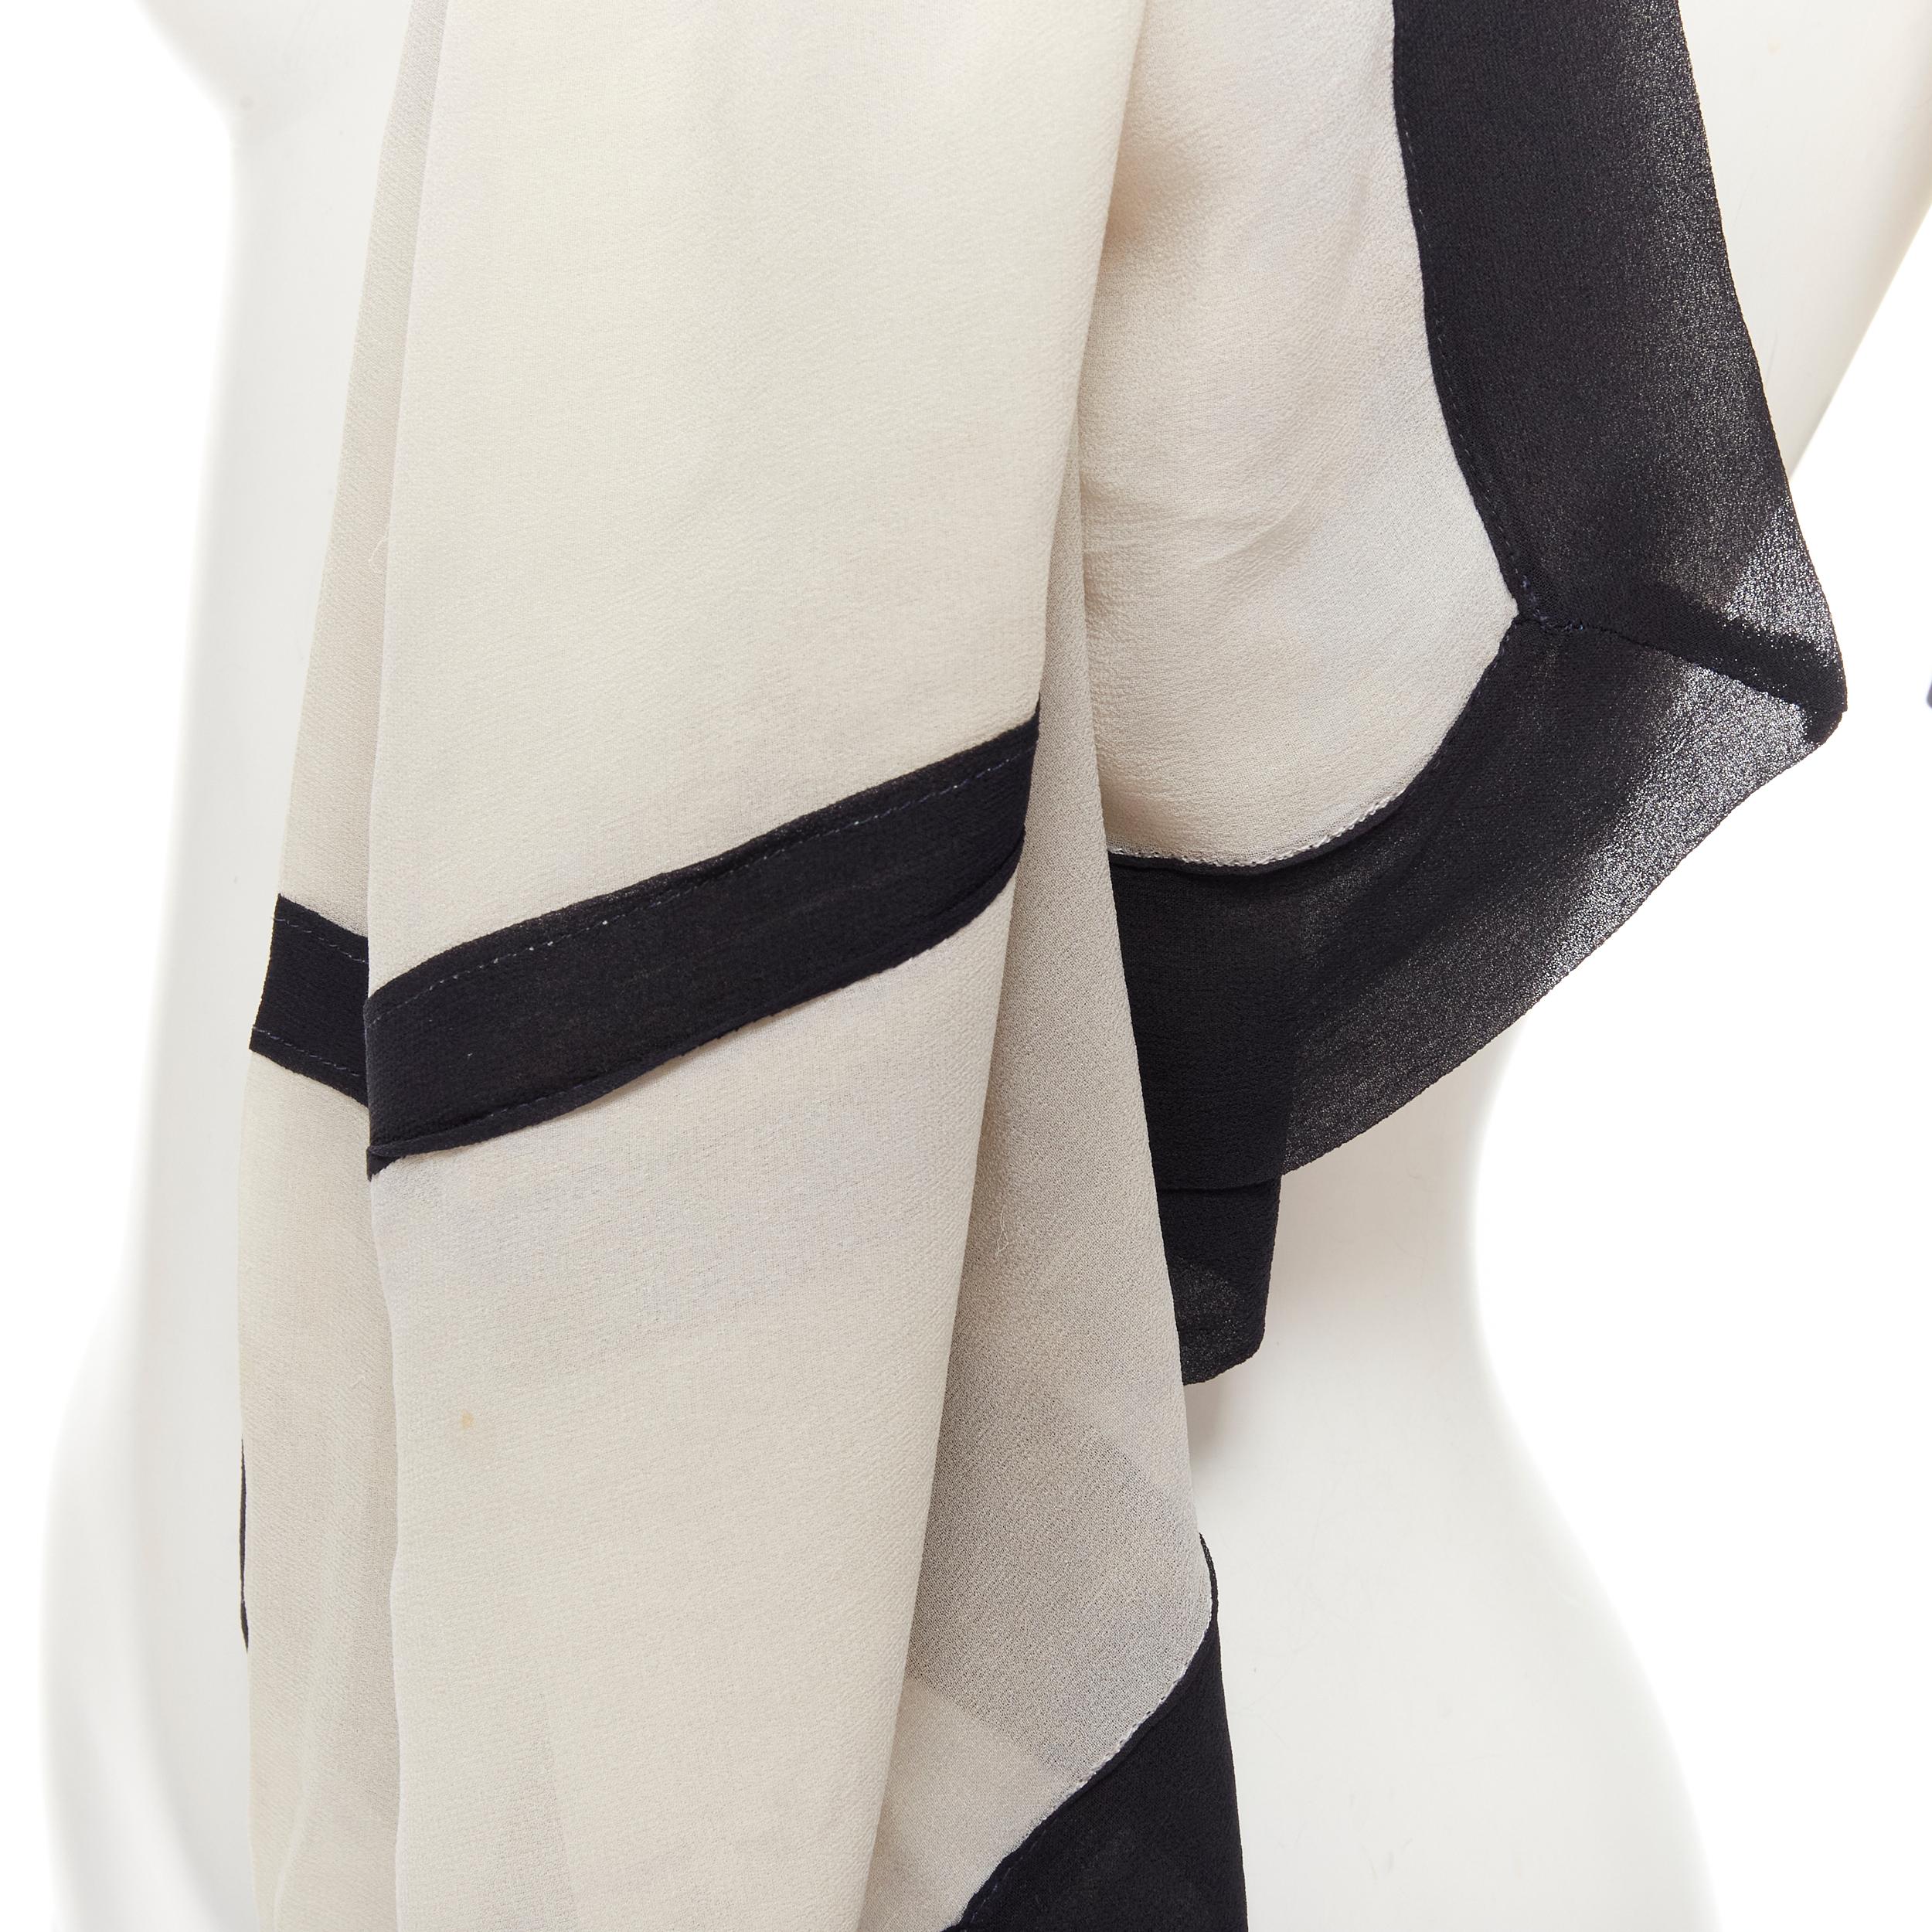 GIORGIO ARMANI 100% silk cream black trim large scarf 
Reference: AEMA/A00089 
Brand: Giorgio Armani 
Material: Silk 
Color: White 
Pattern: Solid 
Made in: Italy 

CONDITION: 
Condition: Excellent, this item was pre-owned and is in excellent